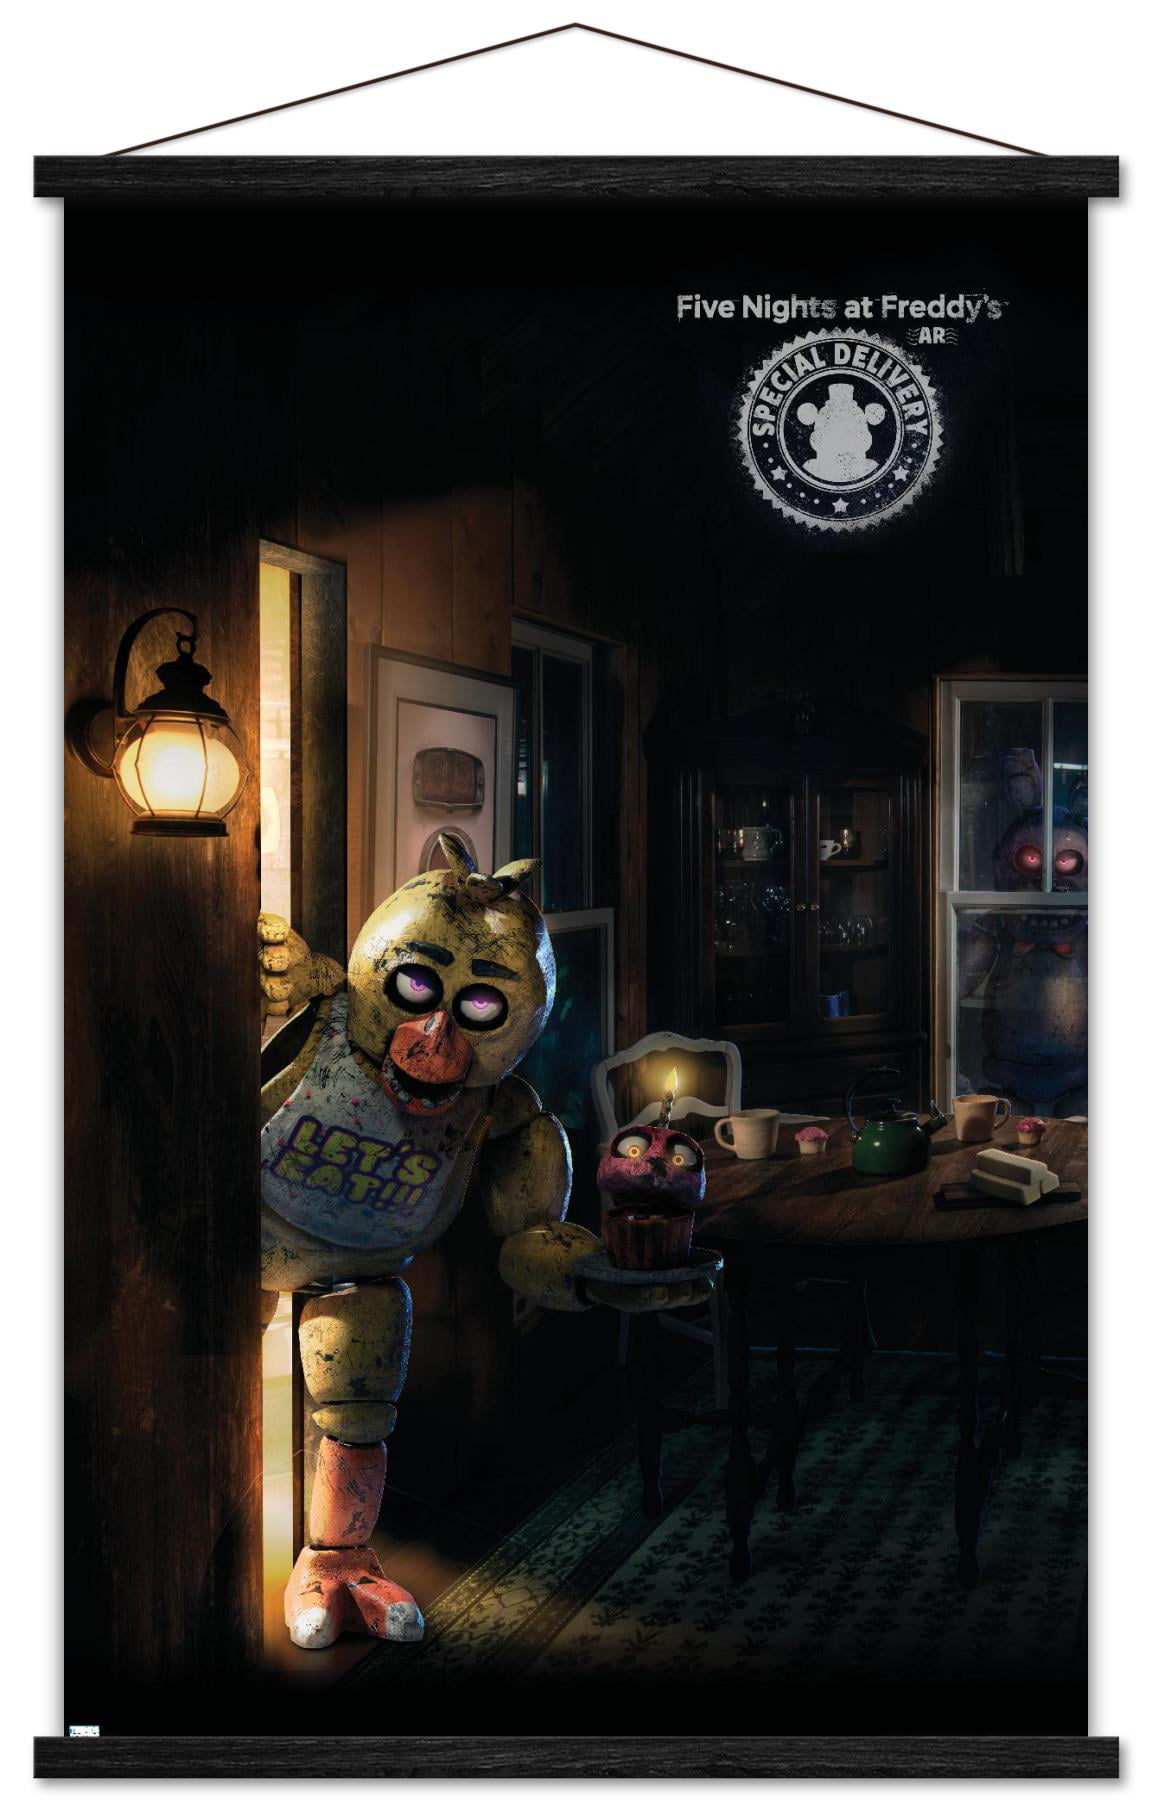 Trends International Five Nights at Freddy's Movie - Teaser One Sheet Wall  Poster